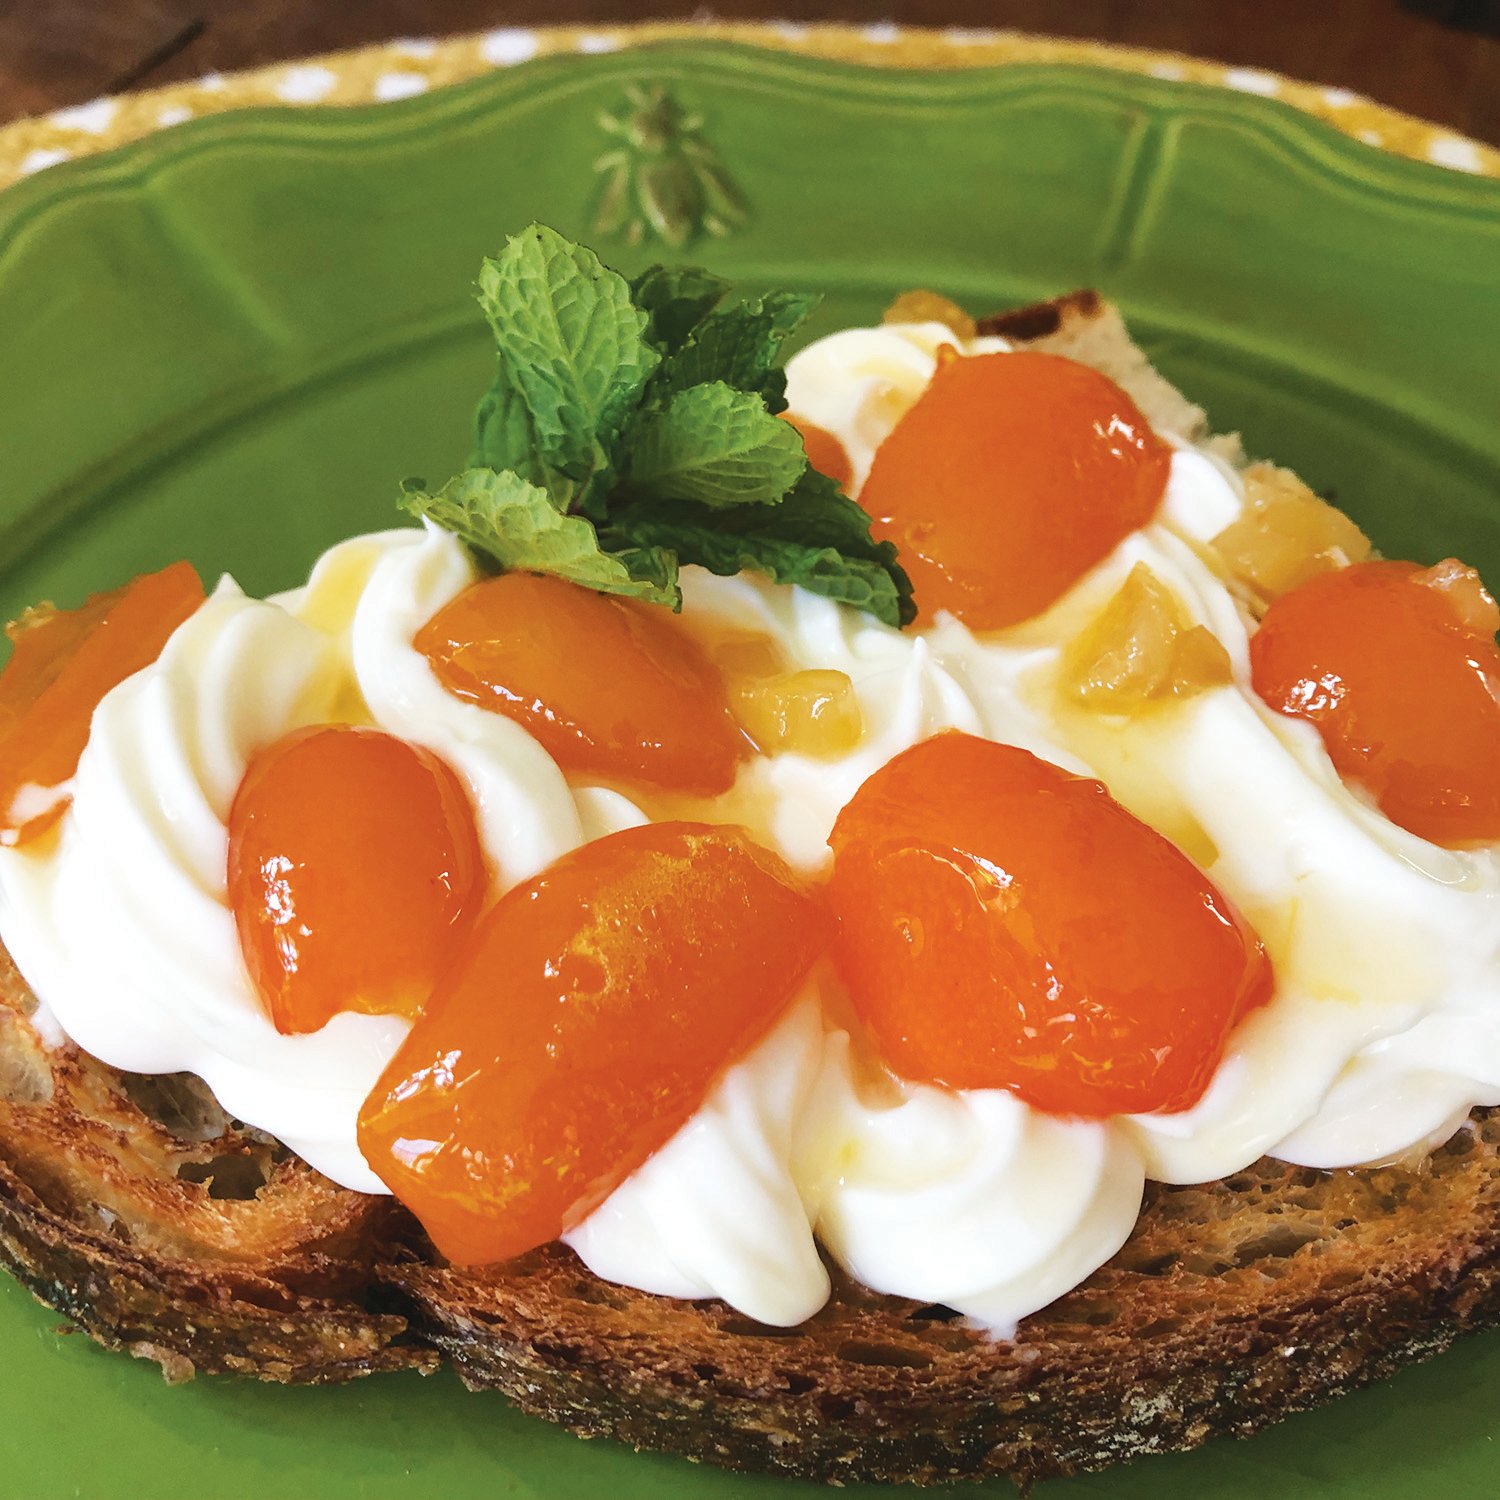 Candied kumquats and ginger make a sweet topper for a breakfast of whipped ricotta on toast.